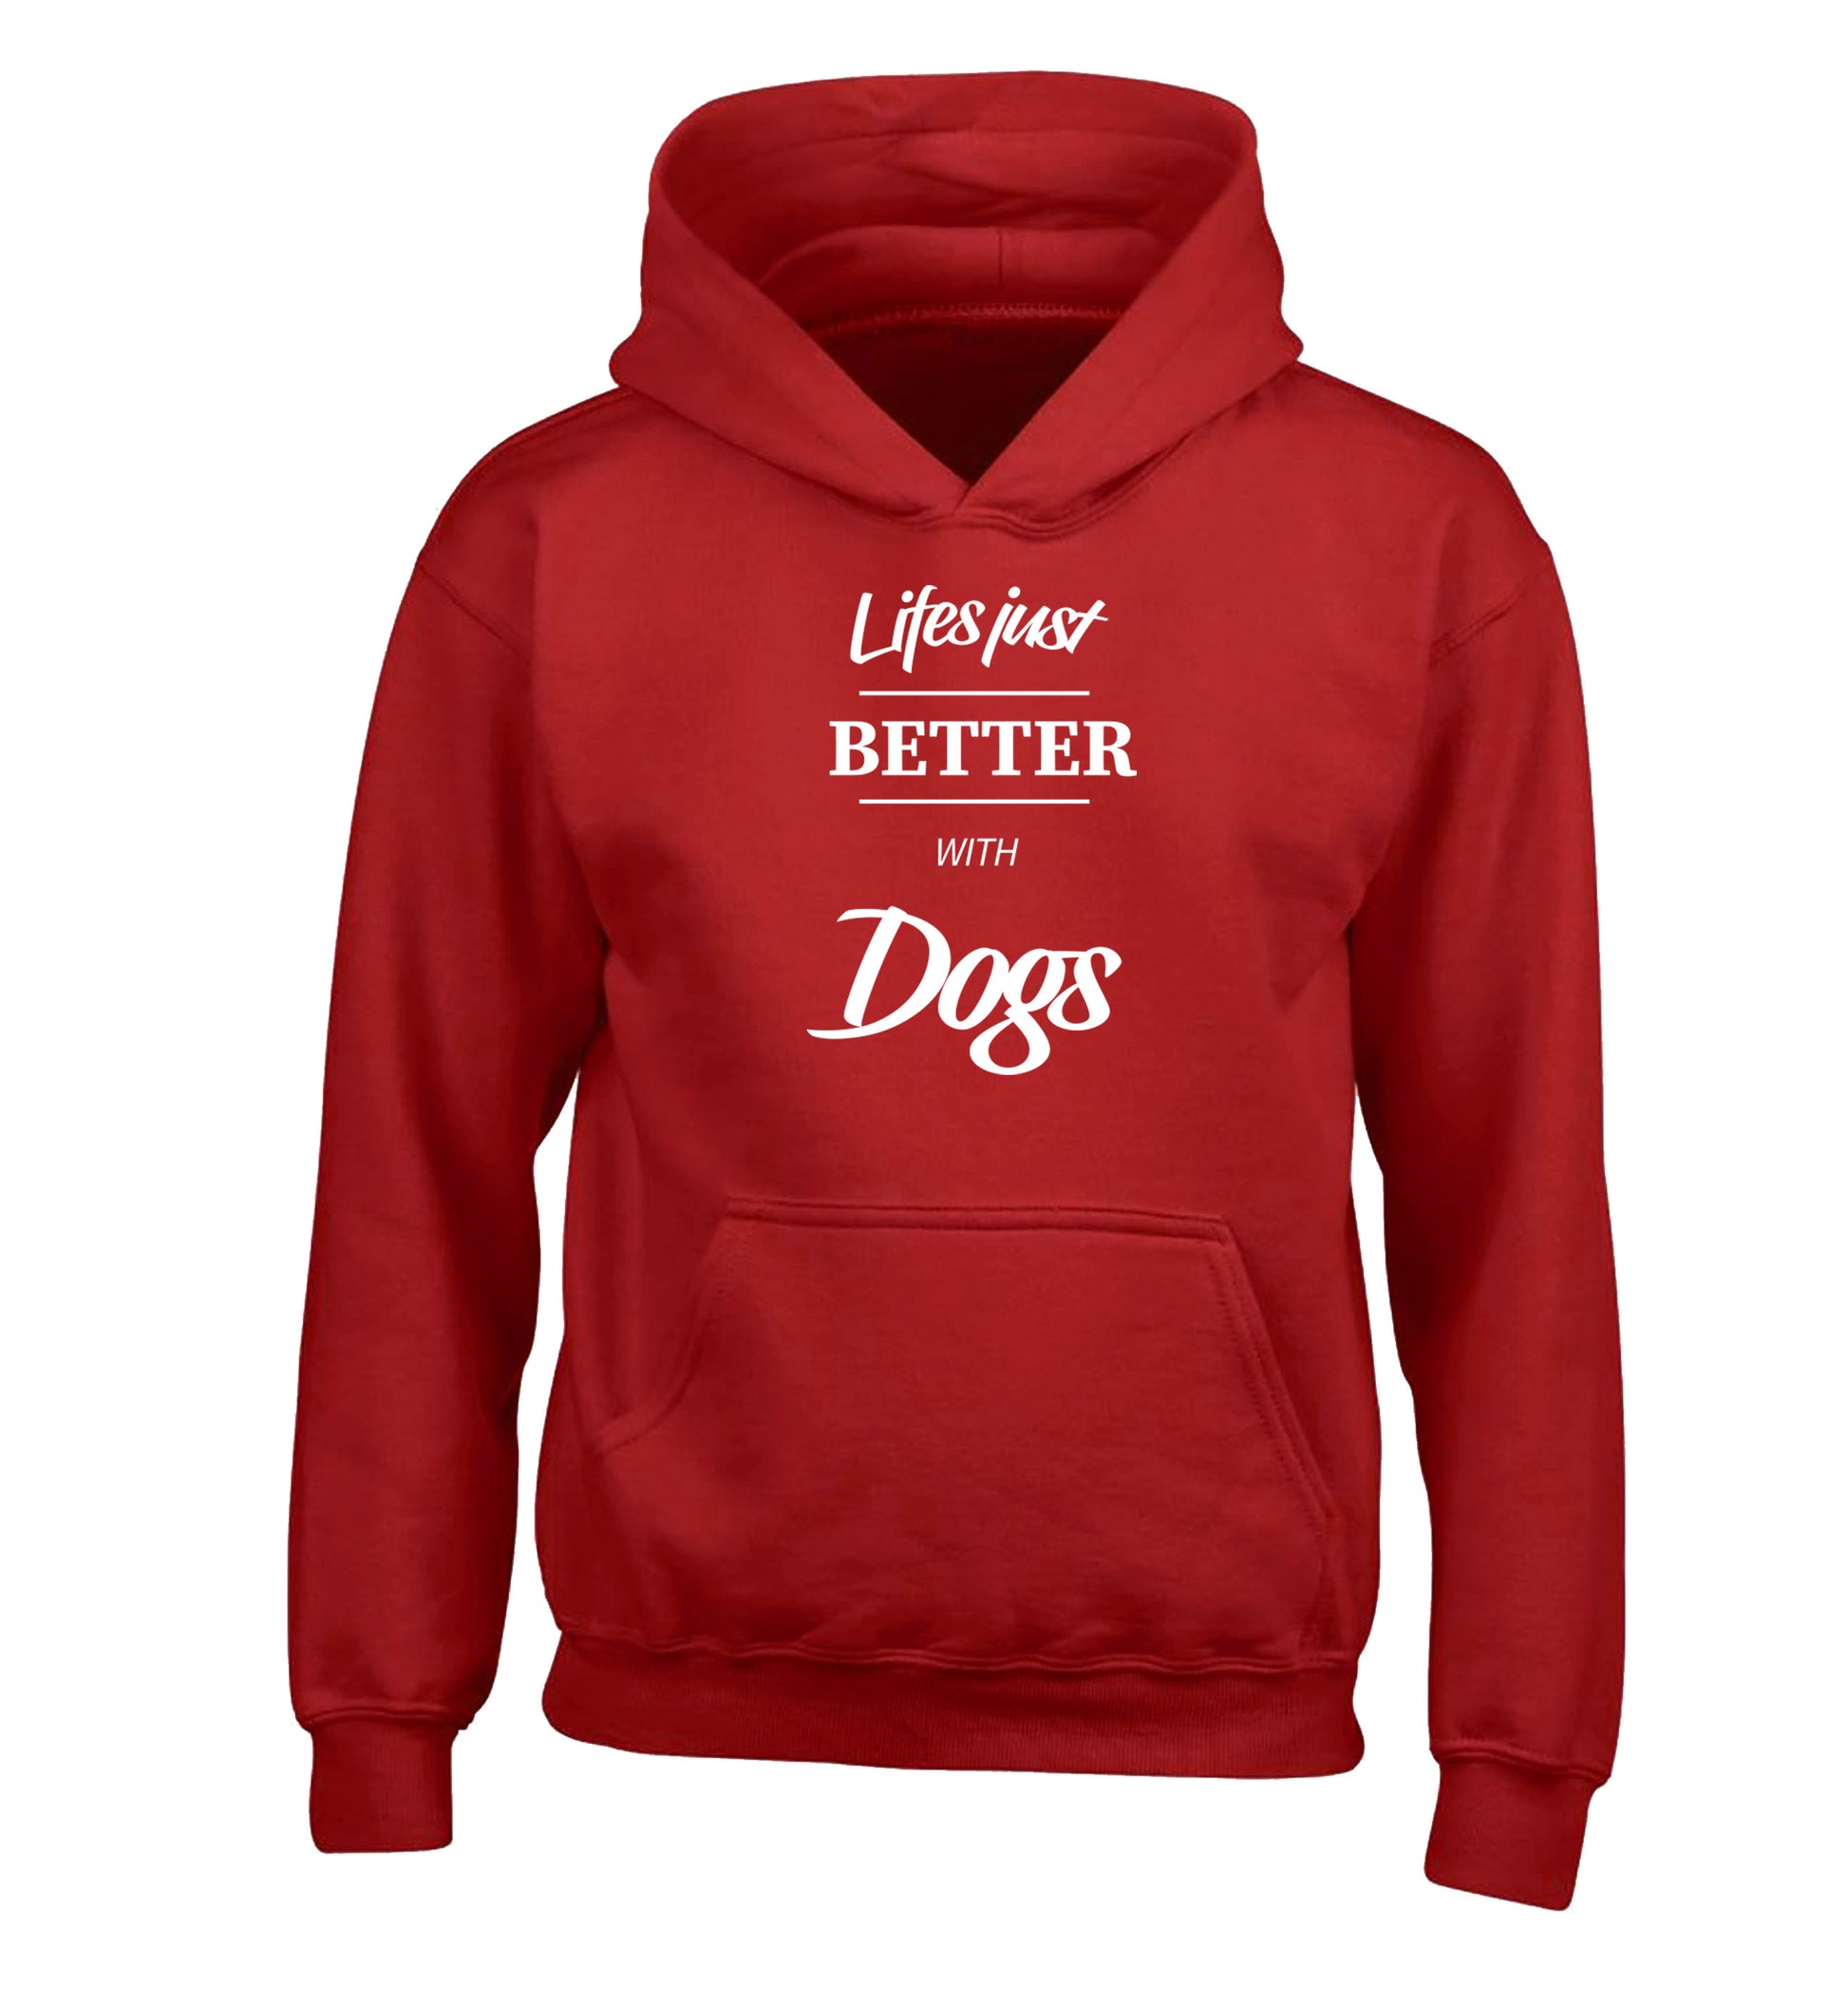 life is better with dogs children's red hoodie 12-13 Years